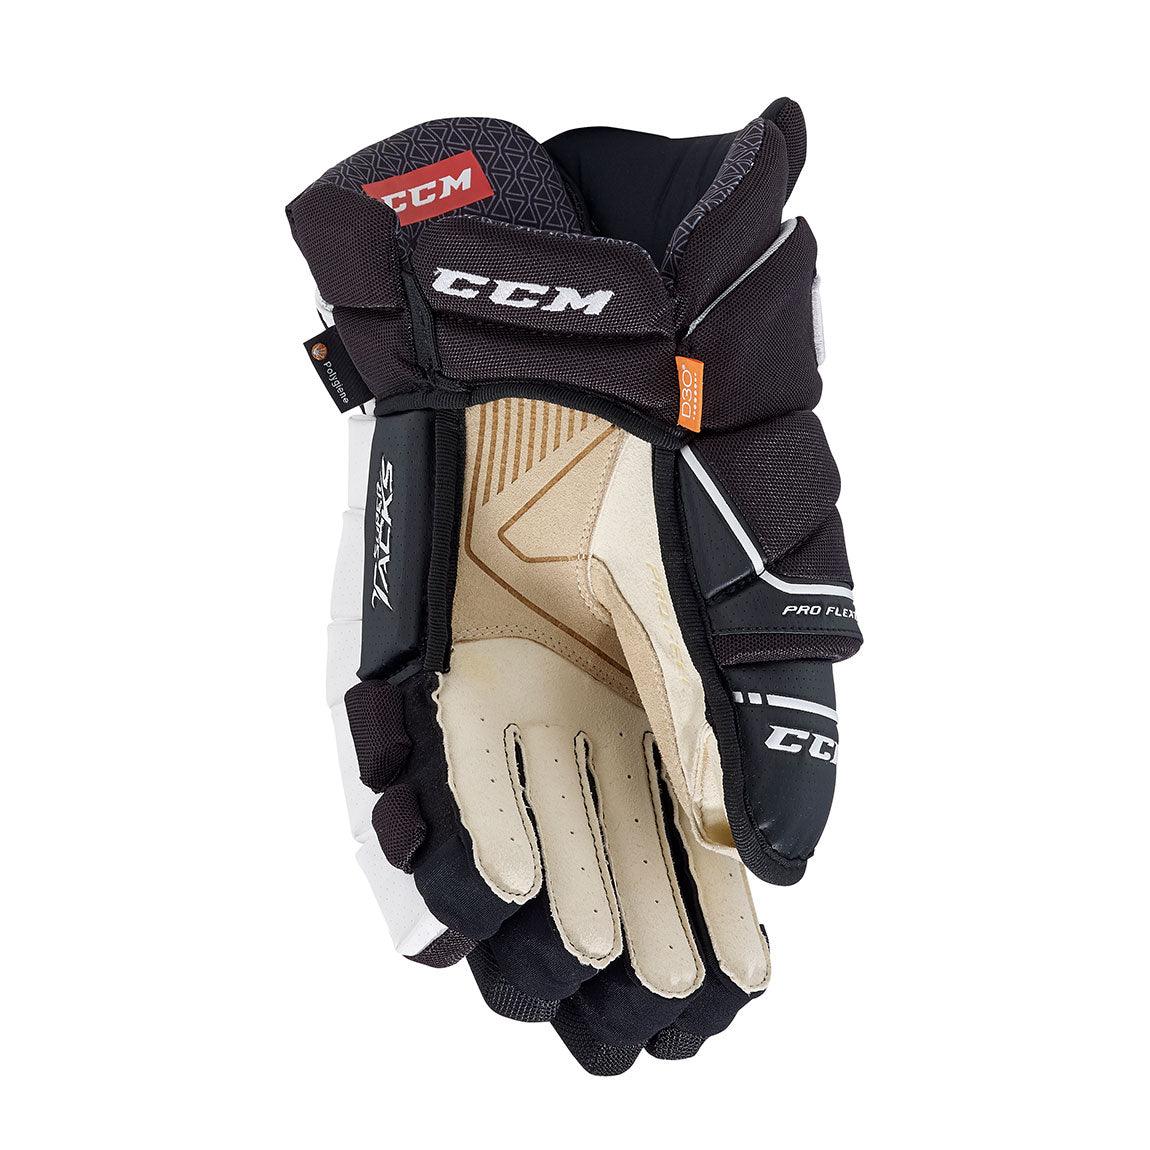 Super Tacks AS1 Hockey Gloves - Junior - Sports Excellence